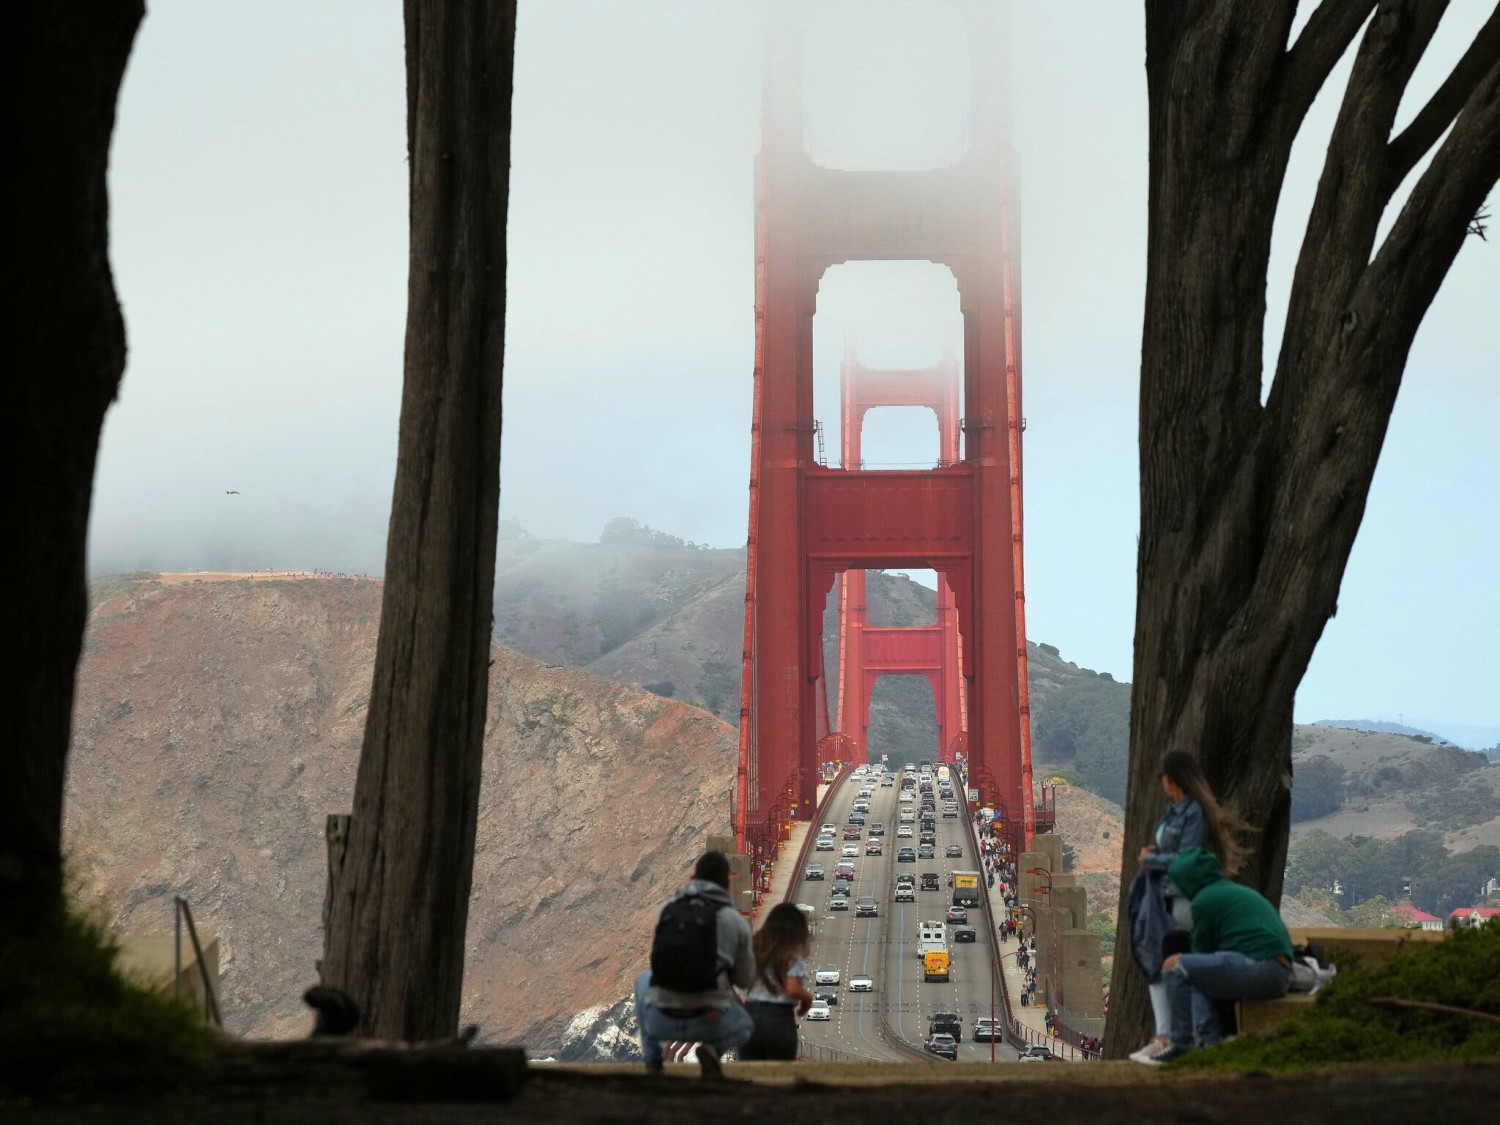 The Golden Gate Bridge in San Francisco. The city’s tourism industry is slowly returning, but it hasn’t fully recovered from the pandemic. Credit...Jim Wilson/The New York Times